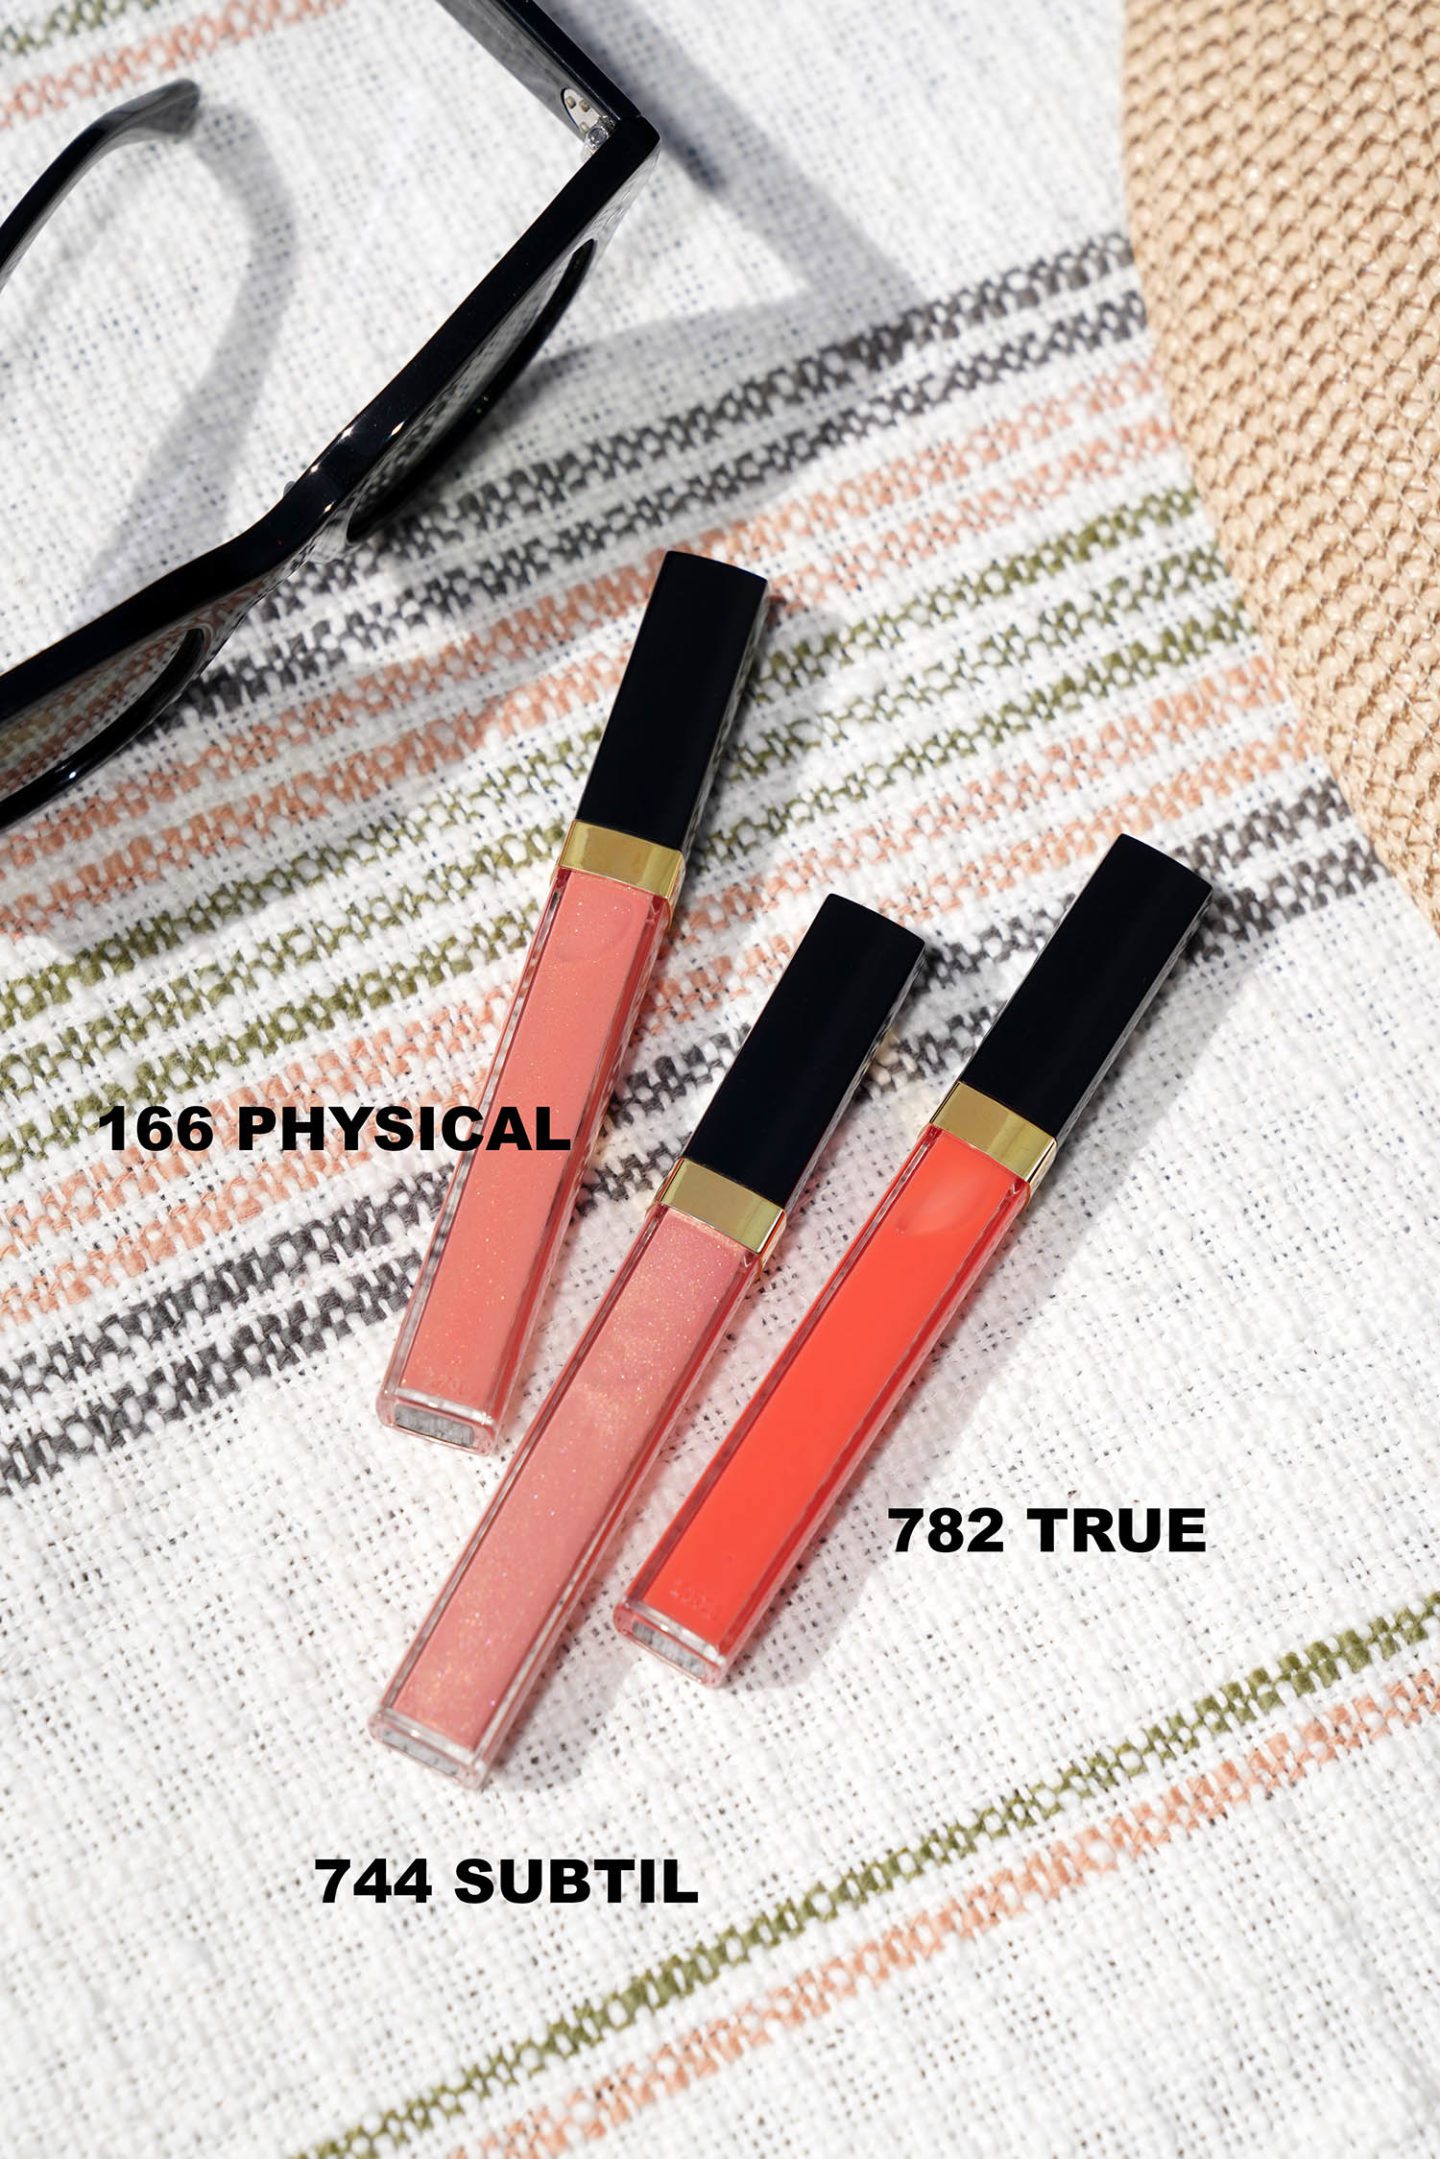 Chanel Rouge Coco Gloss in Physical, Subtil and True